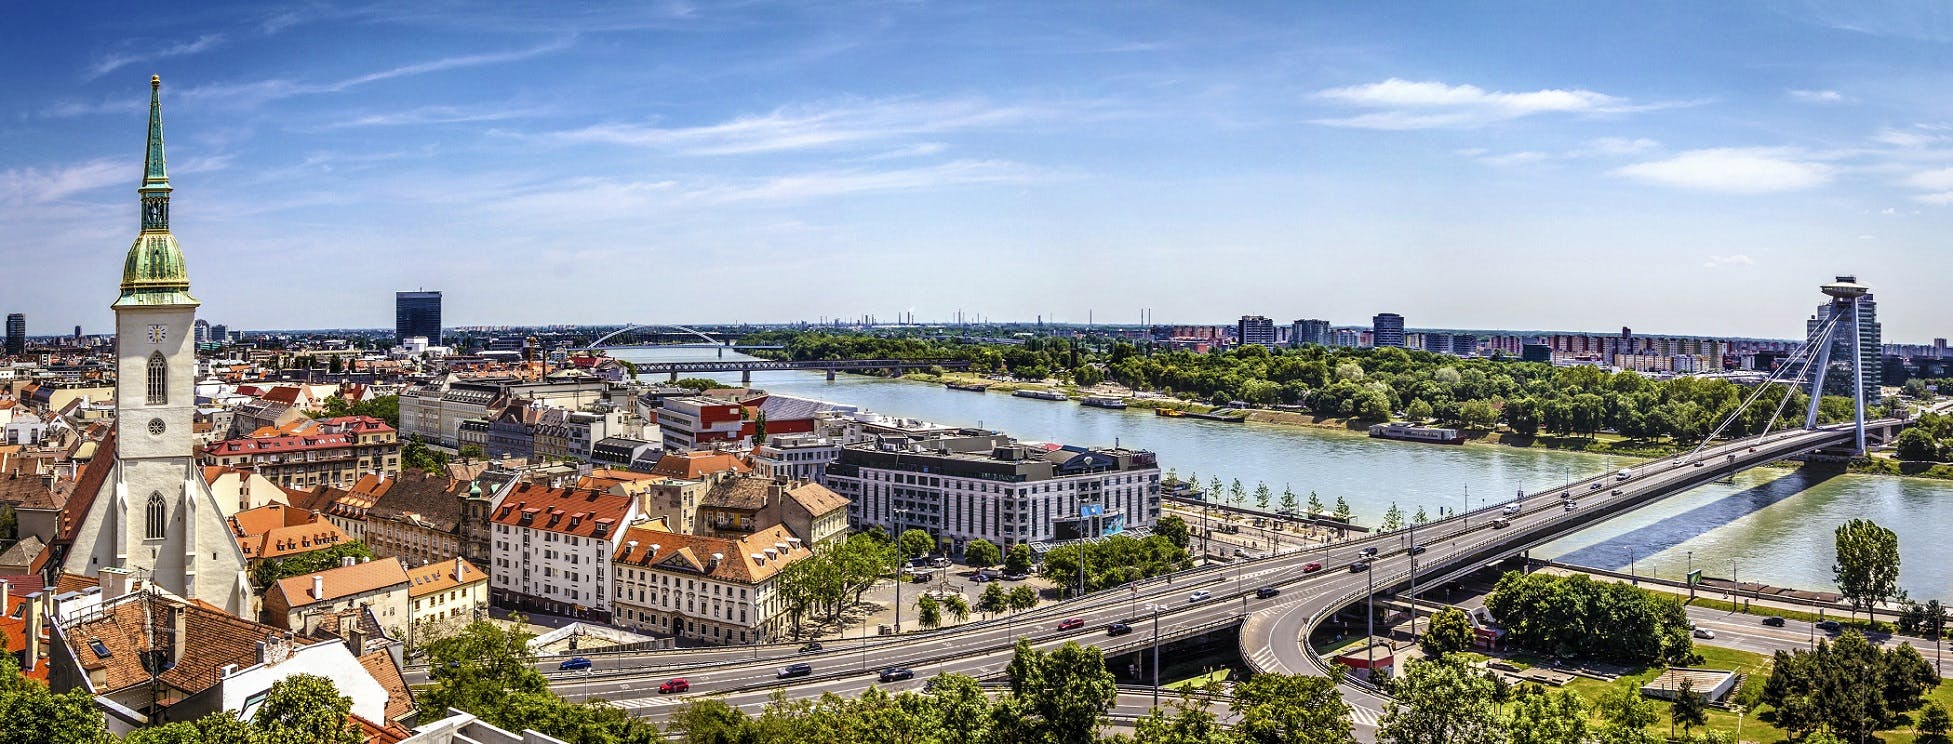 Discover Bratislava A Private Day Trip from Vienna with a Guided Tour